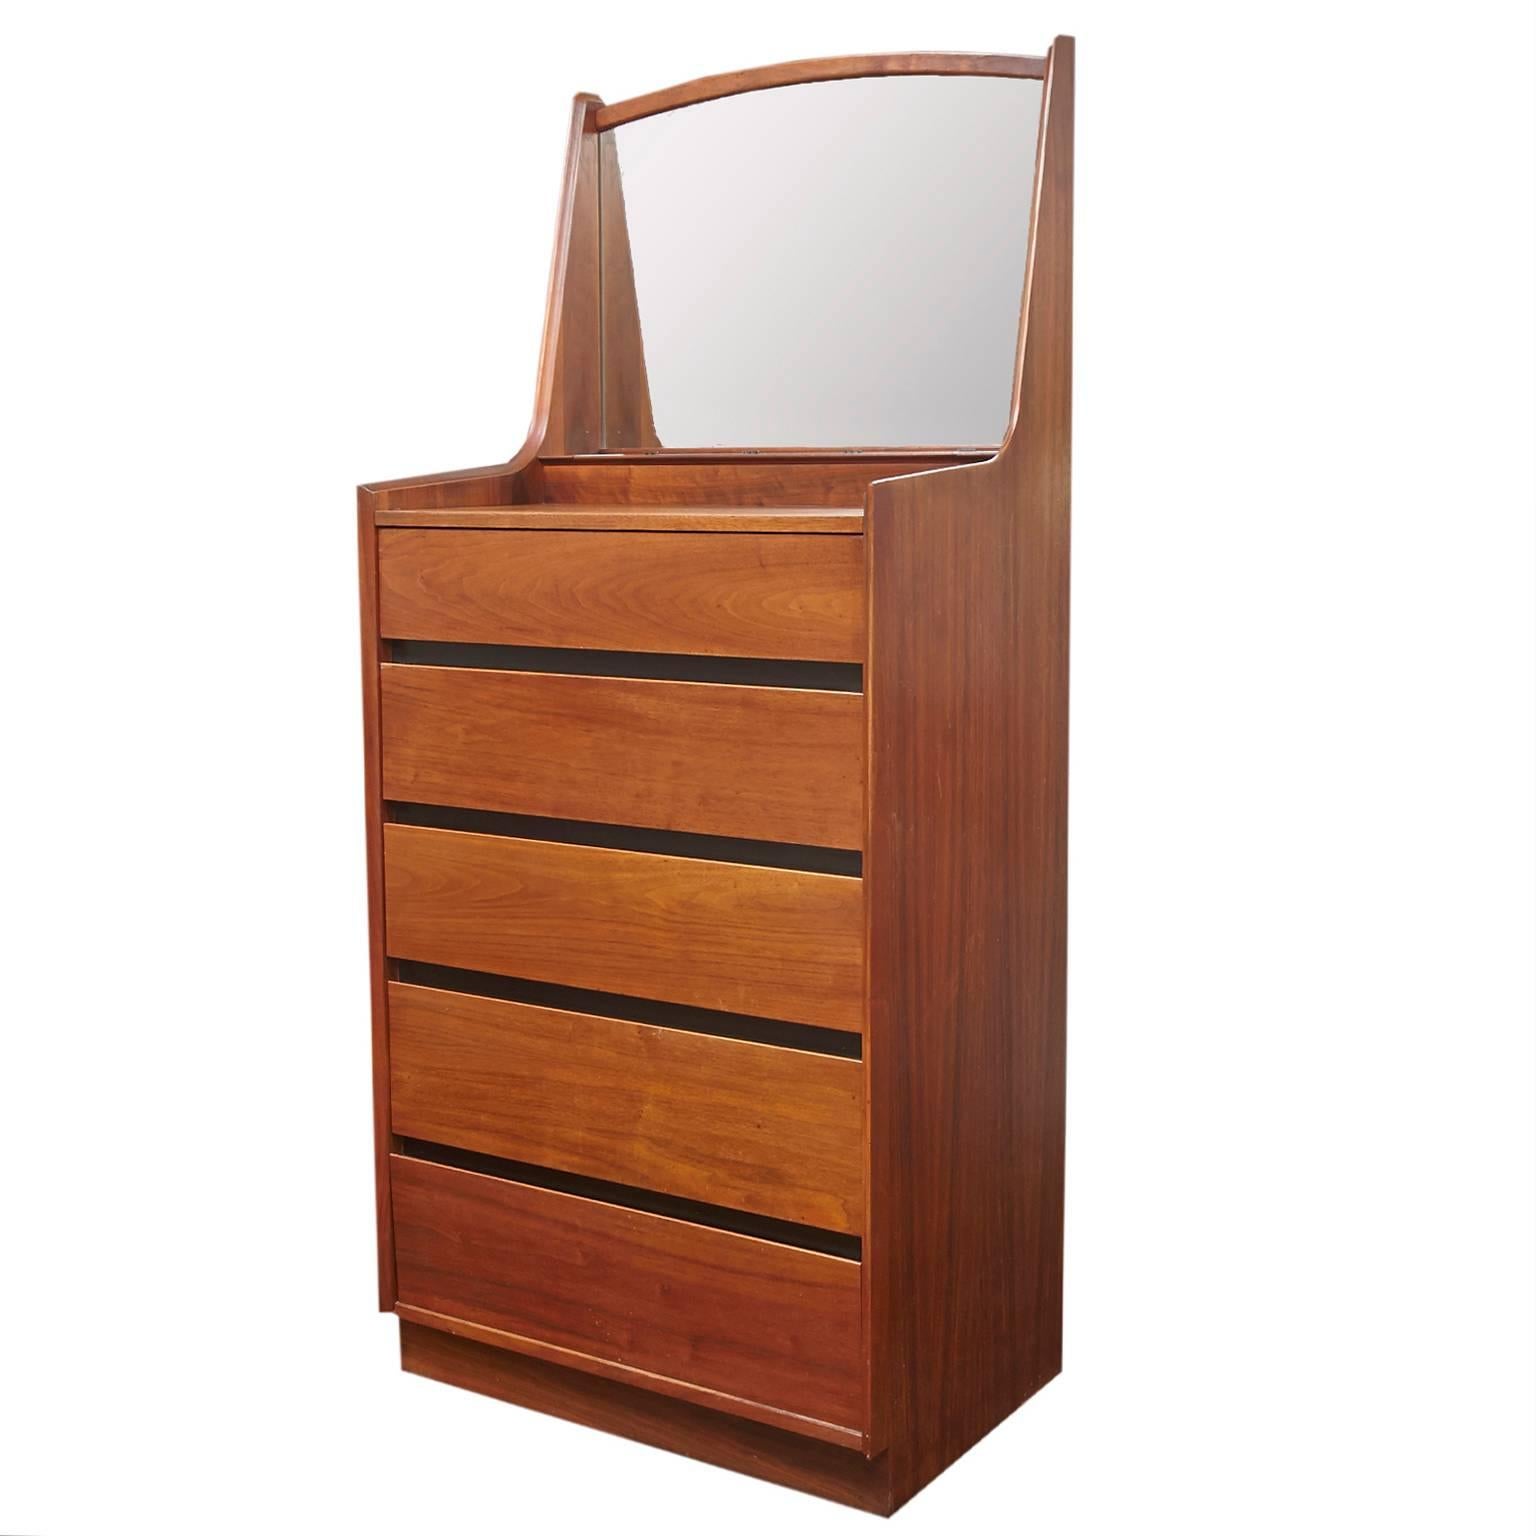 Dillingham Mid-Century Modern gentleman's dresser/highboy with built in mirror.
Designed by Merton Gershun for Dillingham. Lightly refinished. Has three compartments on top of dresser. Great addition to any style home.